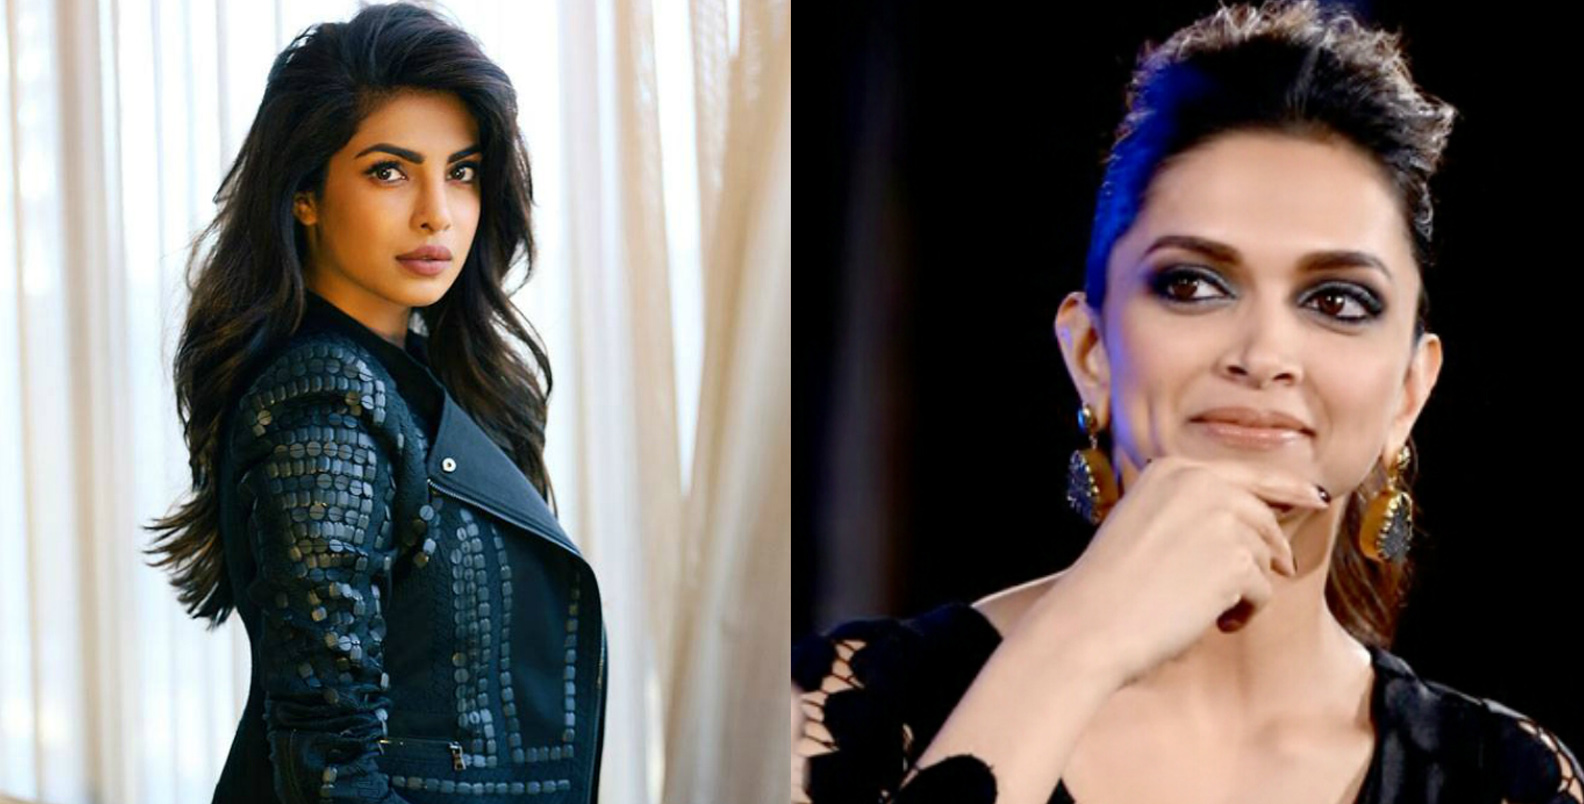 Xxx Deepika And Xxx Sexy Video - Deepika's Accent In The New XXX Trailer Is A Dig At Priyanka Chopra? | JFW  Just for women